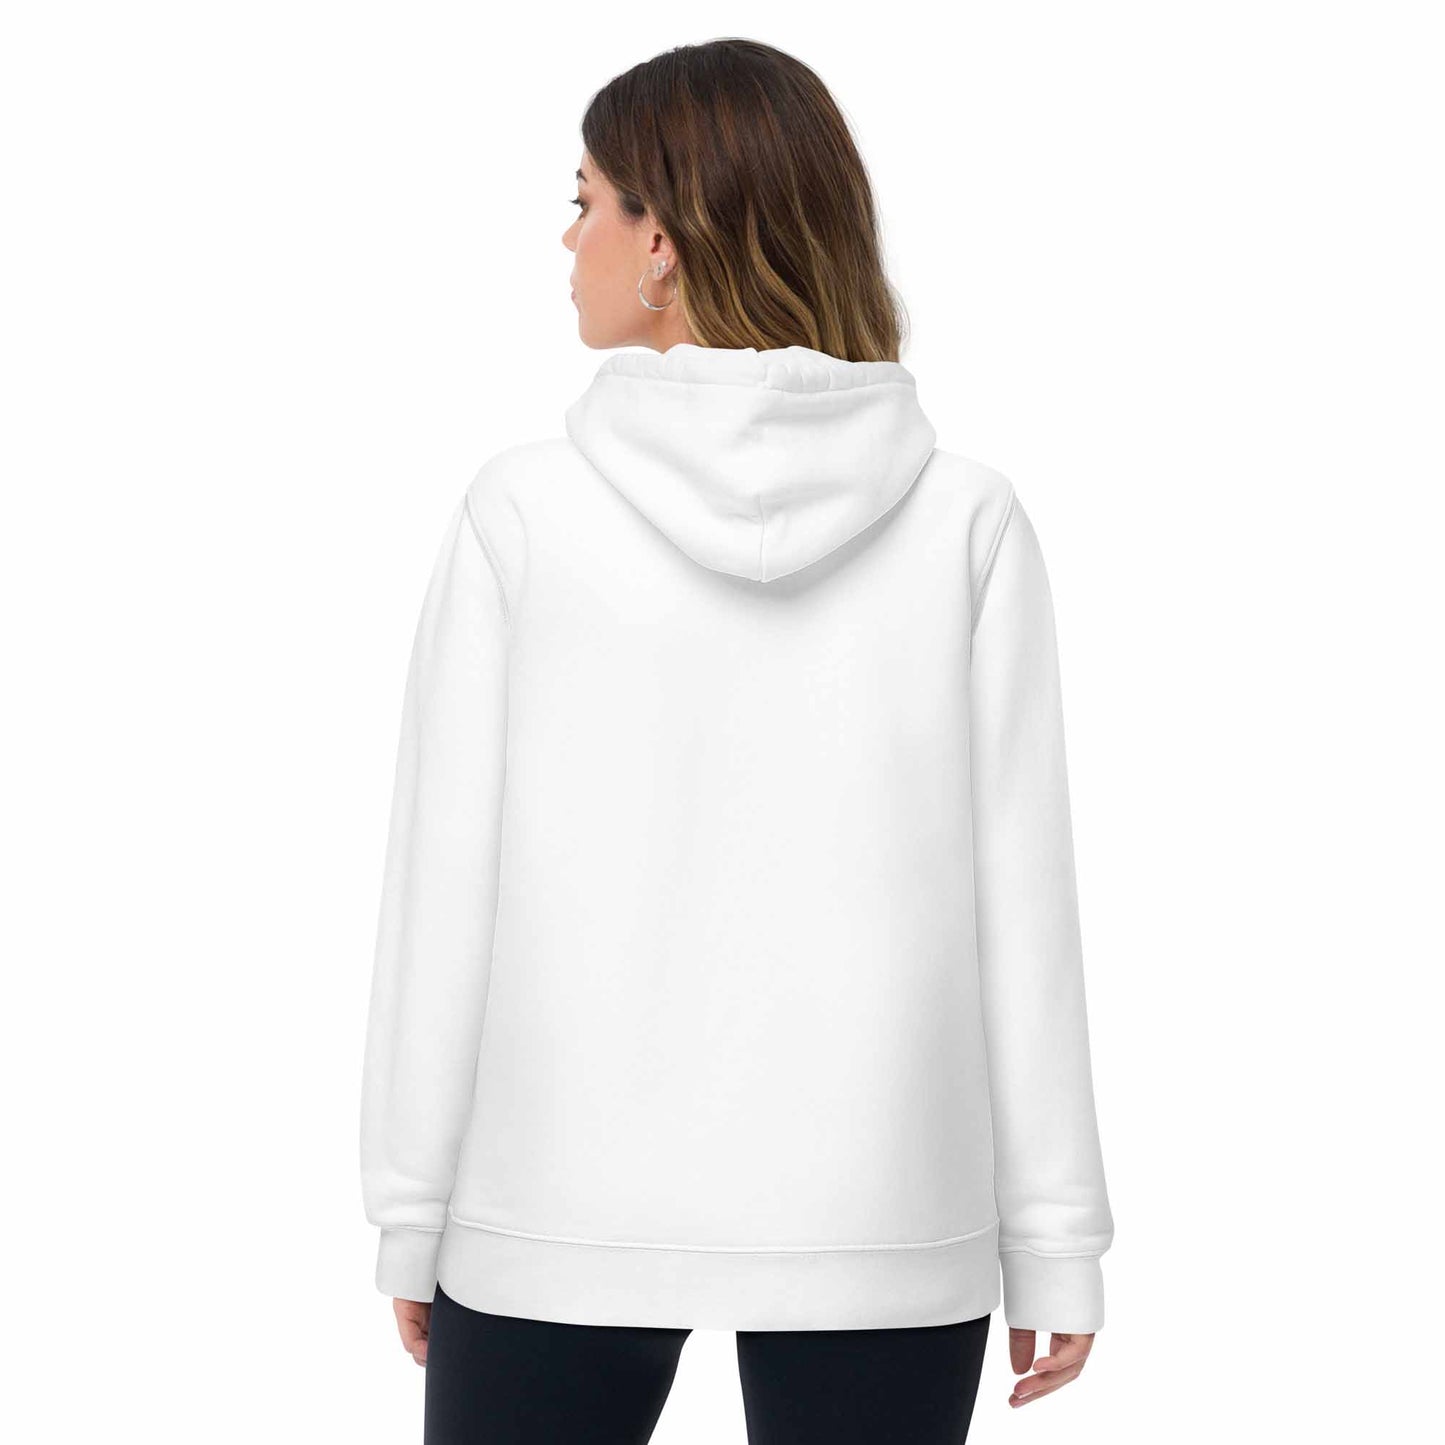 Women white organic cotton hoodie with inspirational quote, "Yes You Can."